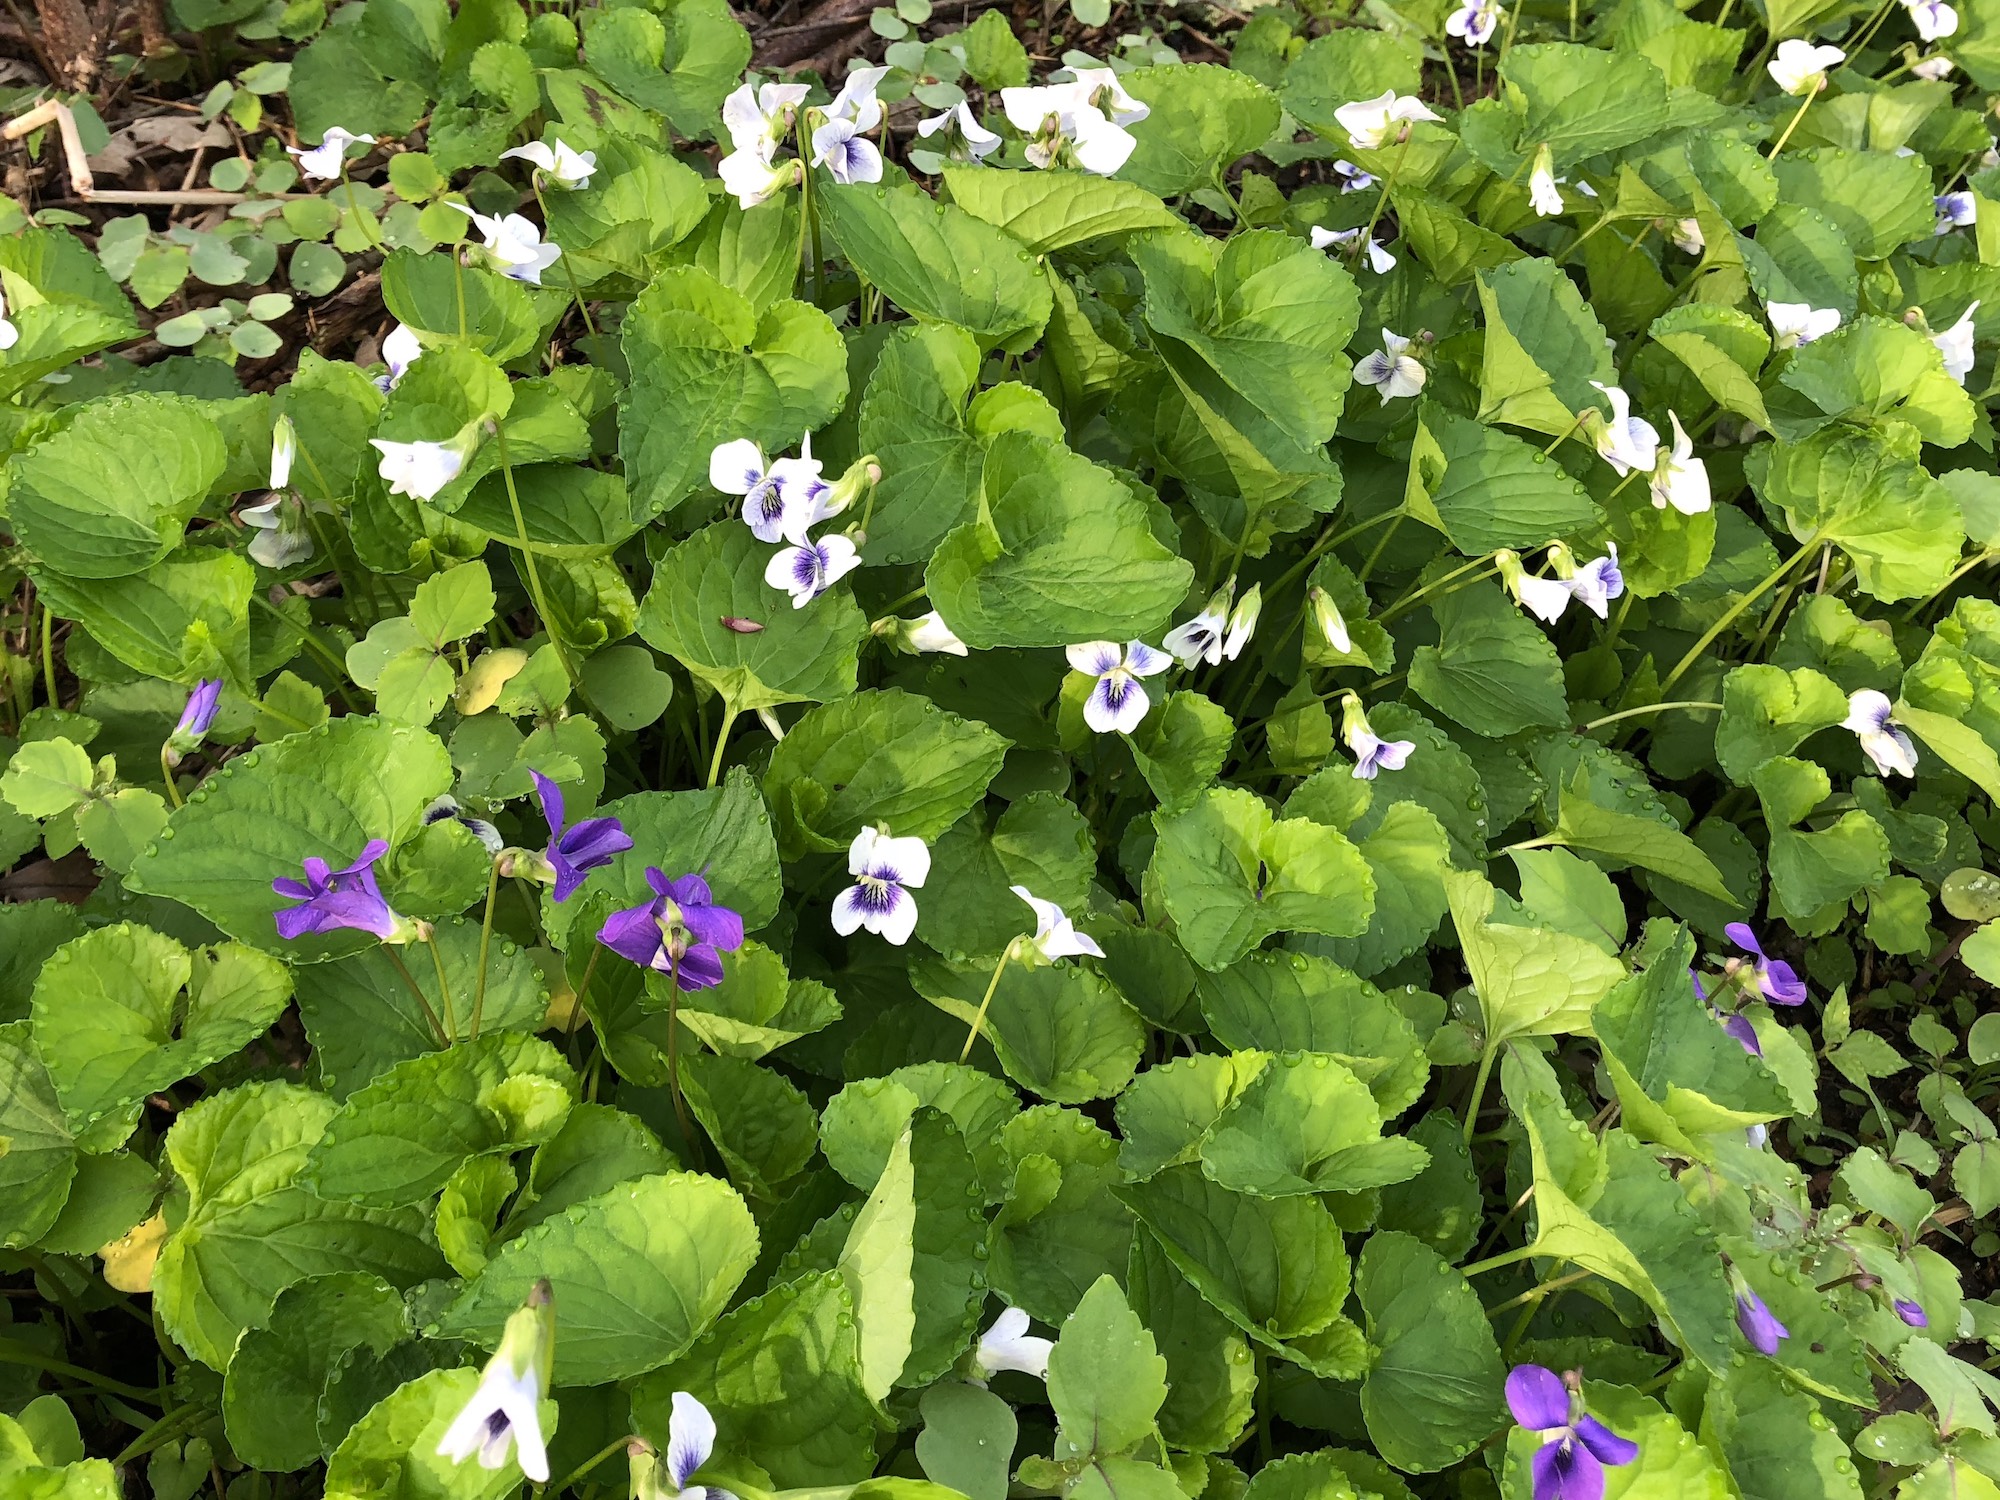 Wood Violets near the Duck Pond on May 15, 2018.